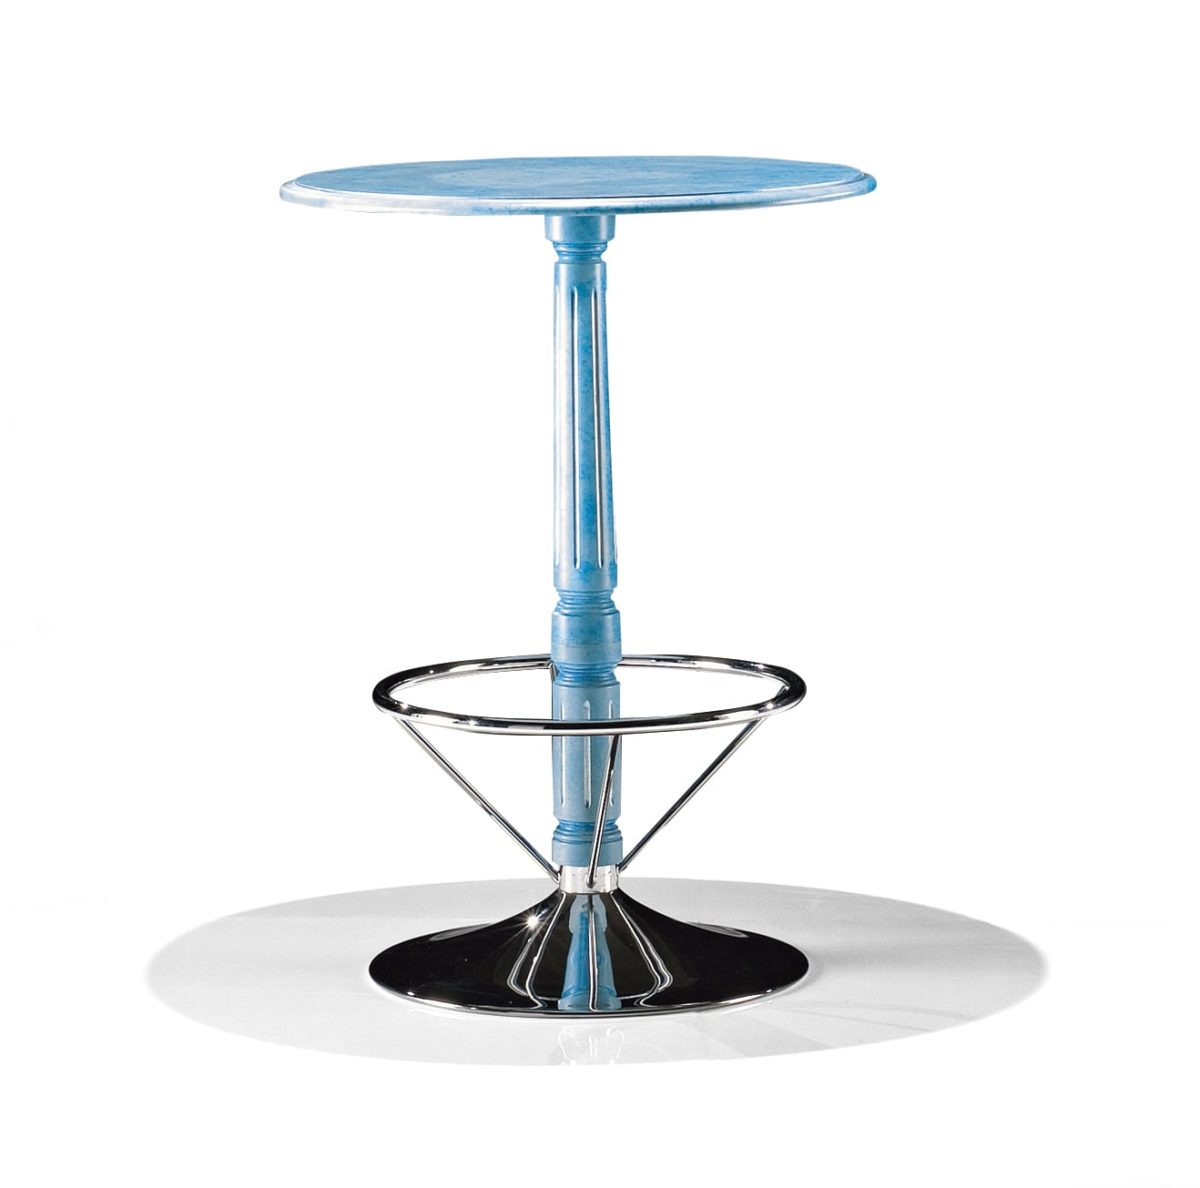 Bakokko_Round-bar-table-with-footrest_1705_T